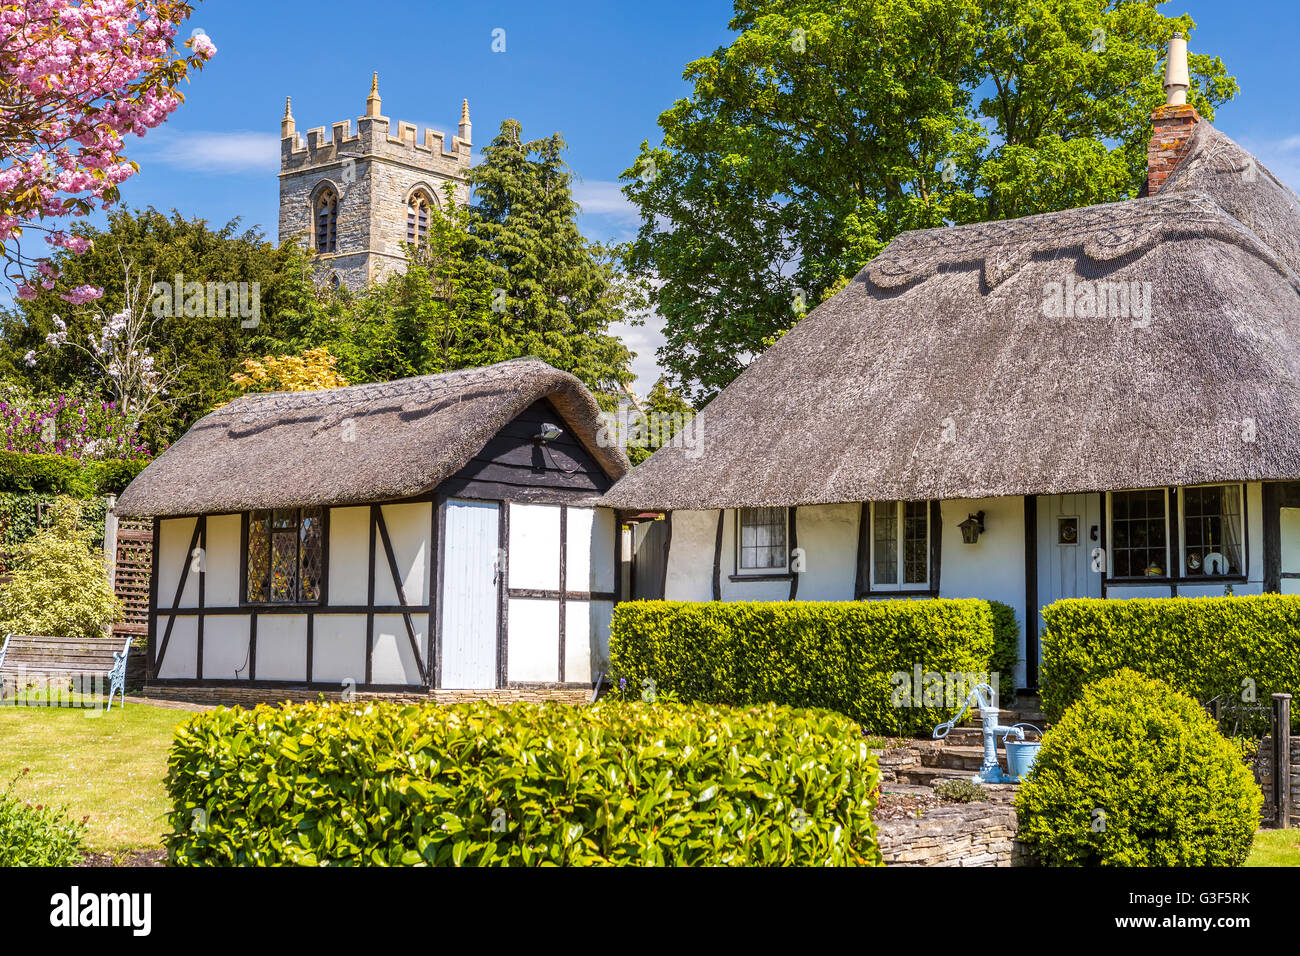 Thatched Cottages at Welford-on-Avon, Warwickshire, England, United Kingdom, Europe. Stock Photo